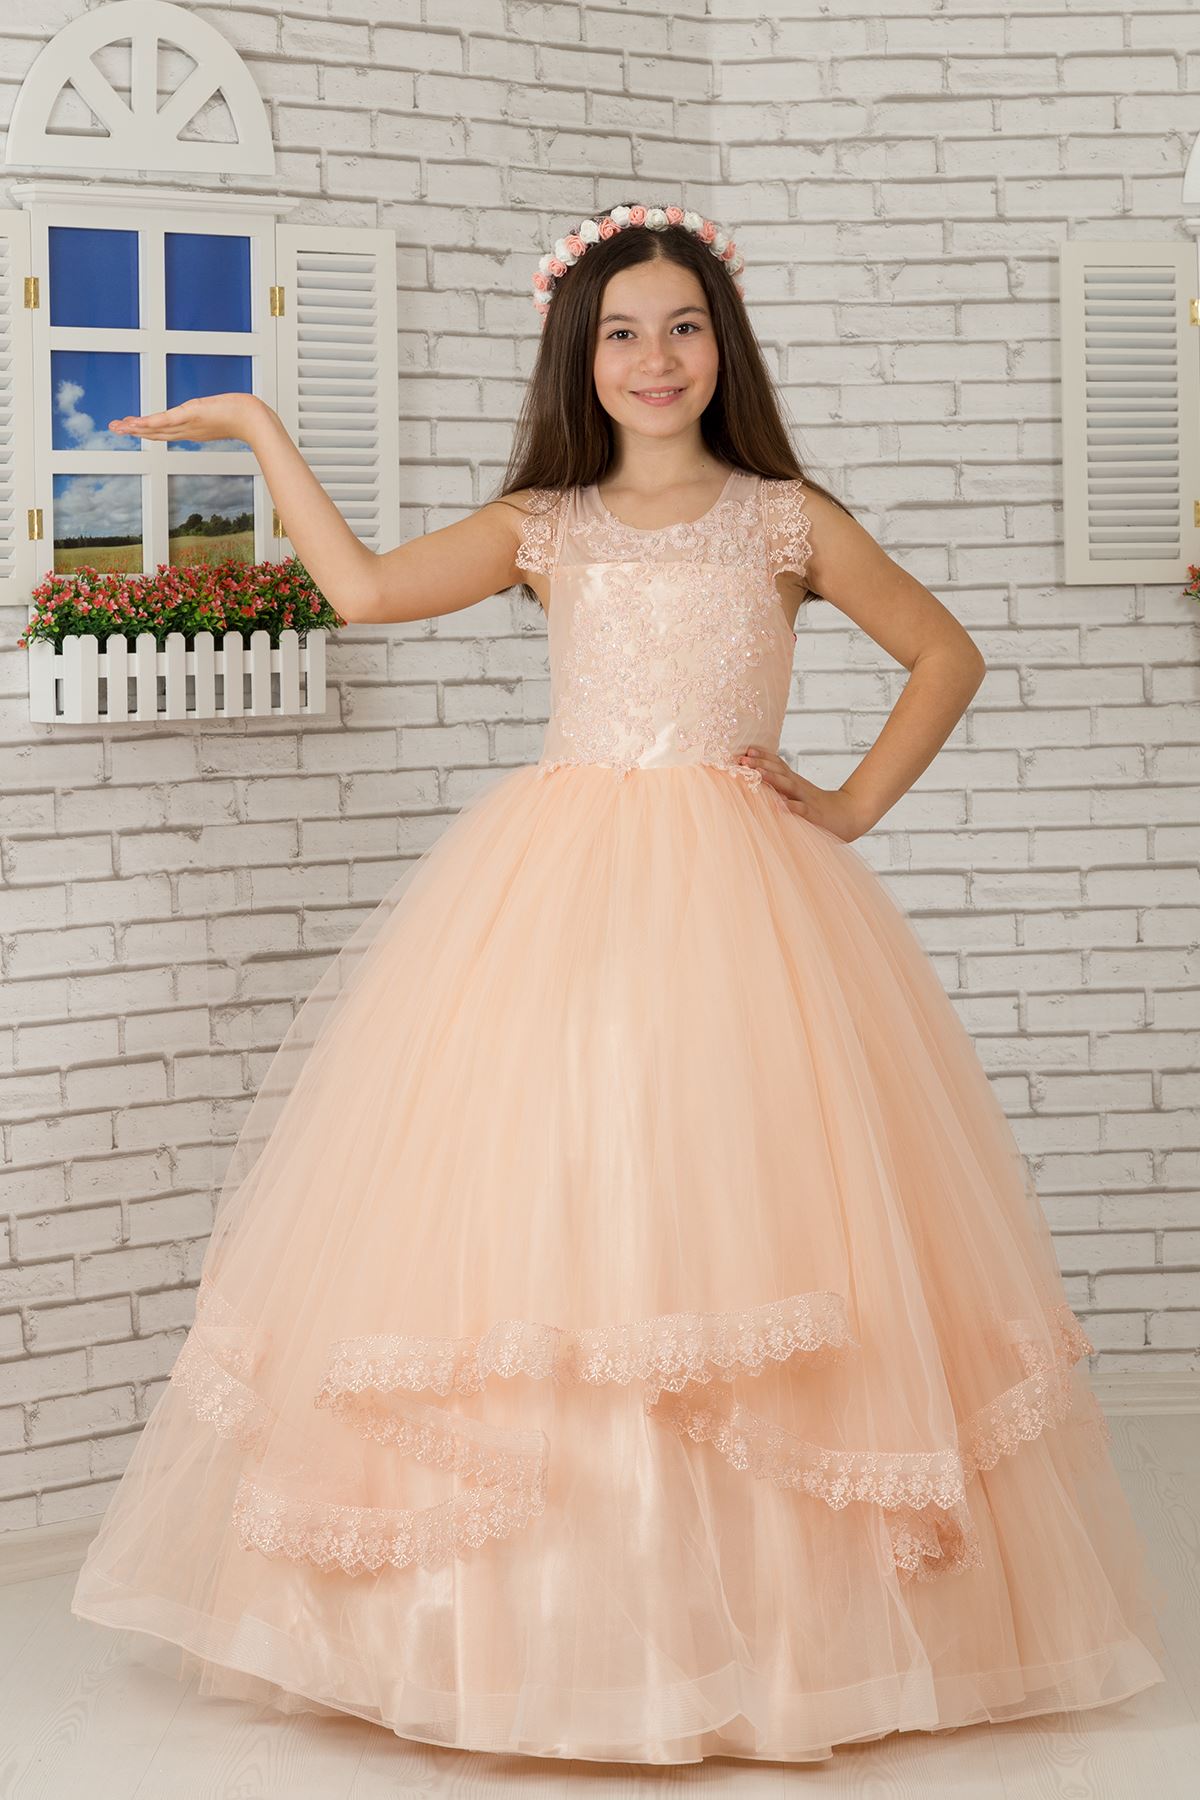 Shoulder detail, body embroidered, tulle fluffy girl's Evening Dress Dress 601 salmon